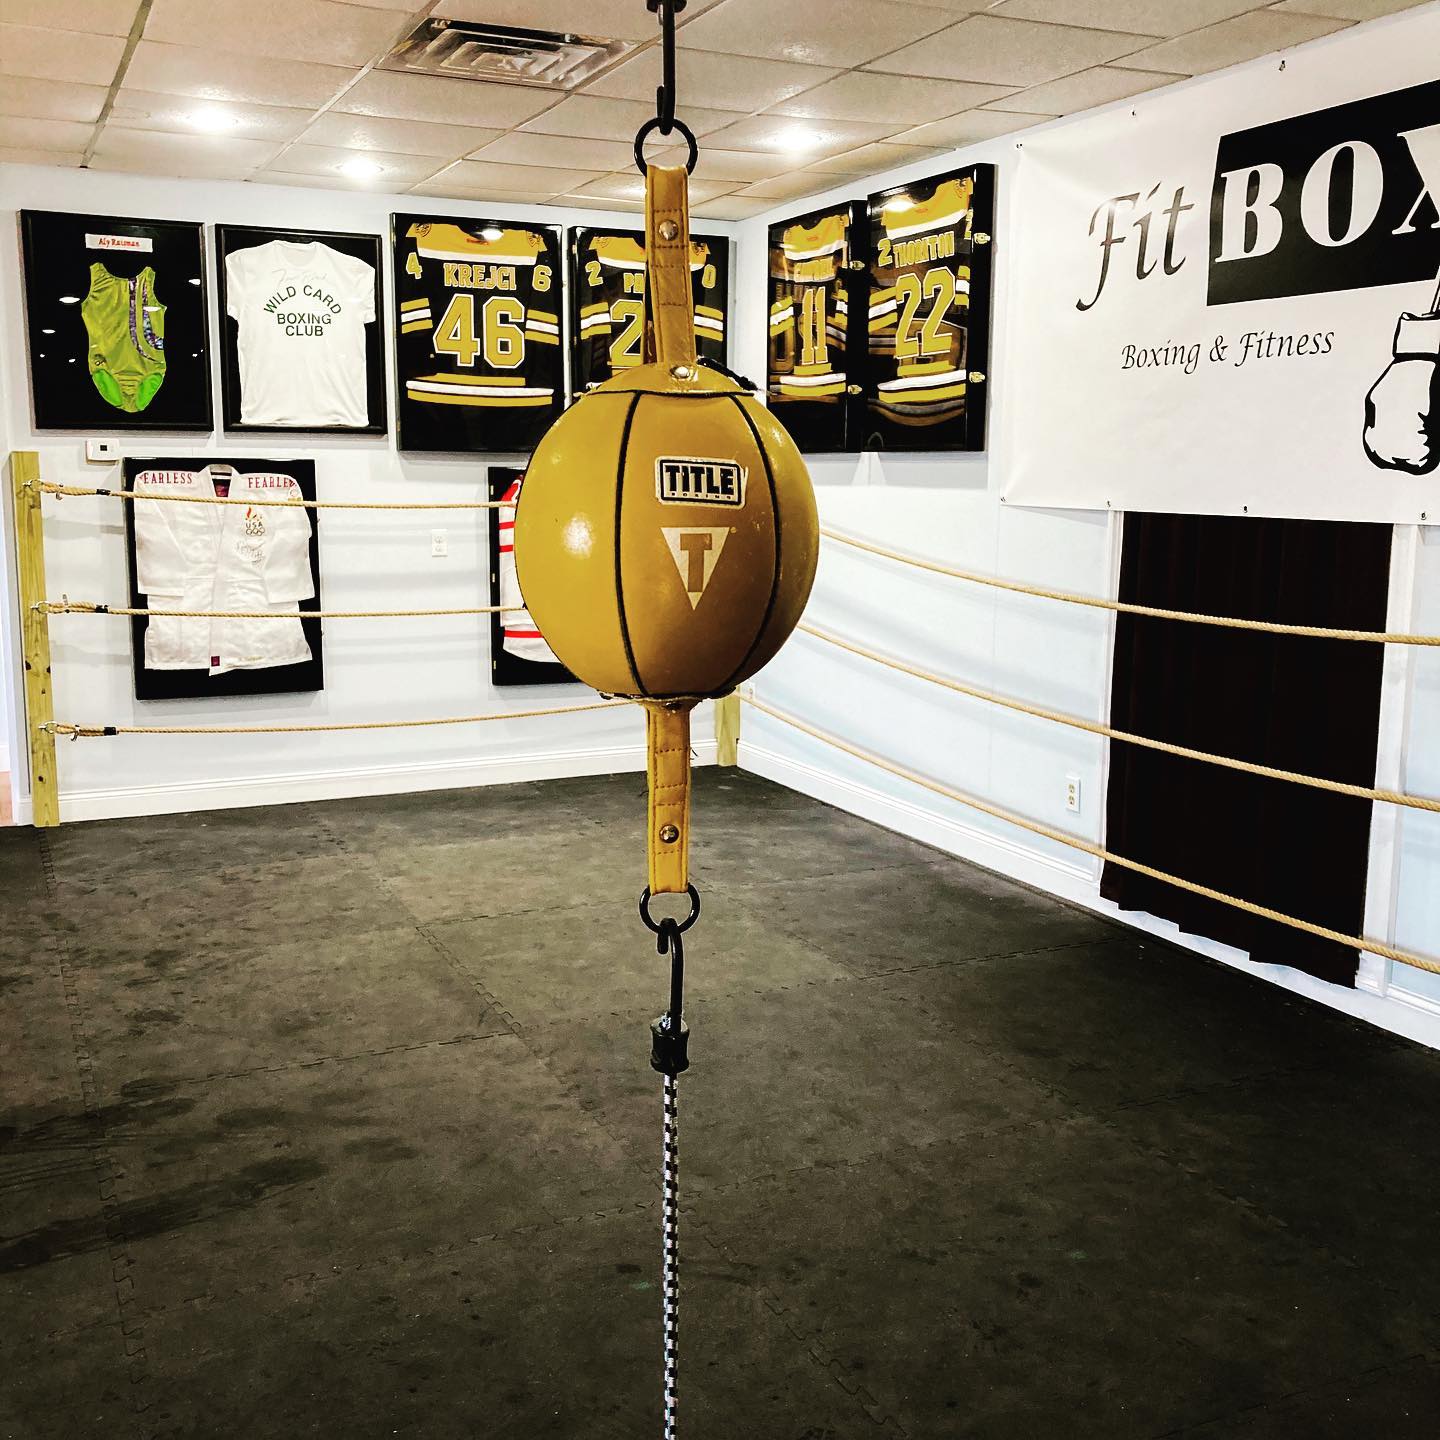 Get that work and learn the Art of the Sport of boxing . Sign up today to schedule a free 1:1 boxing with @tommymcinerney at 
www.FitBOXDedham.com .